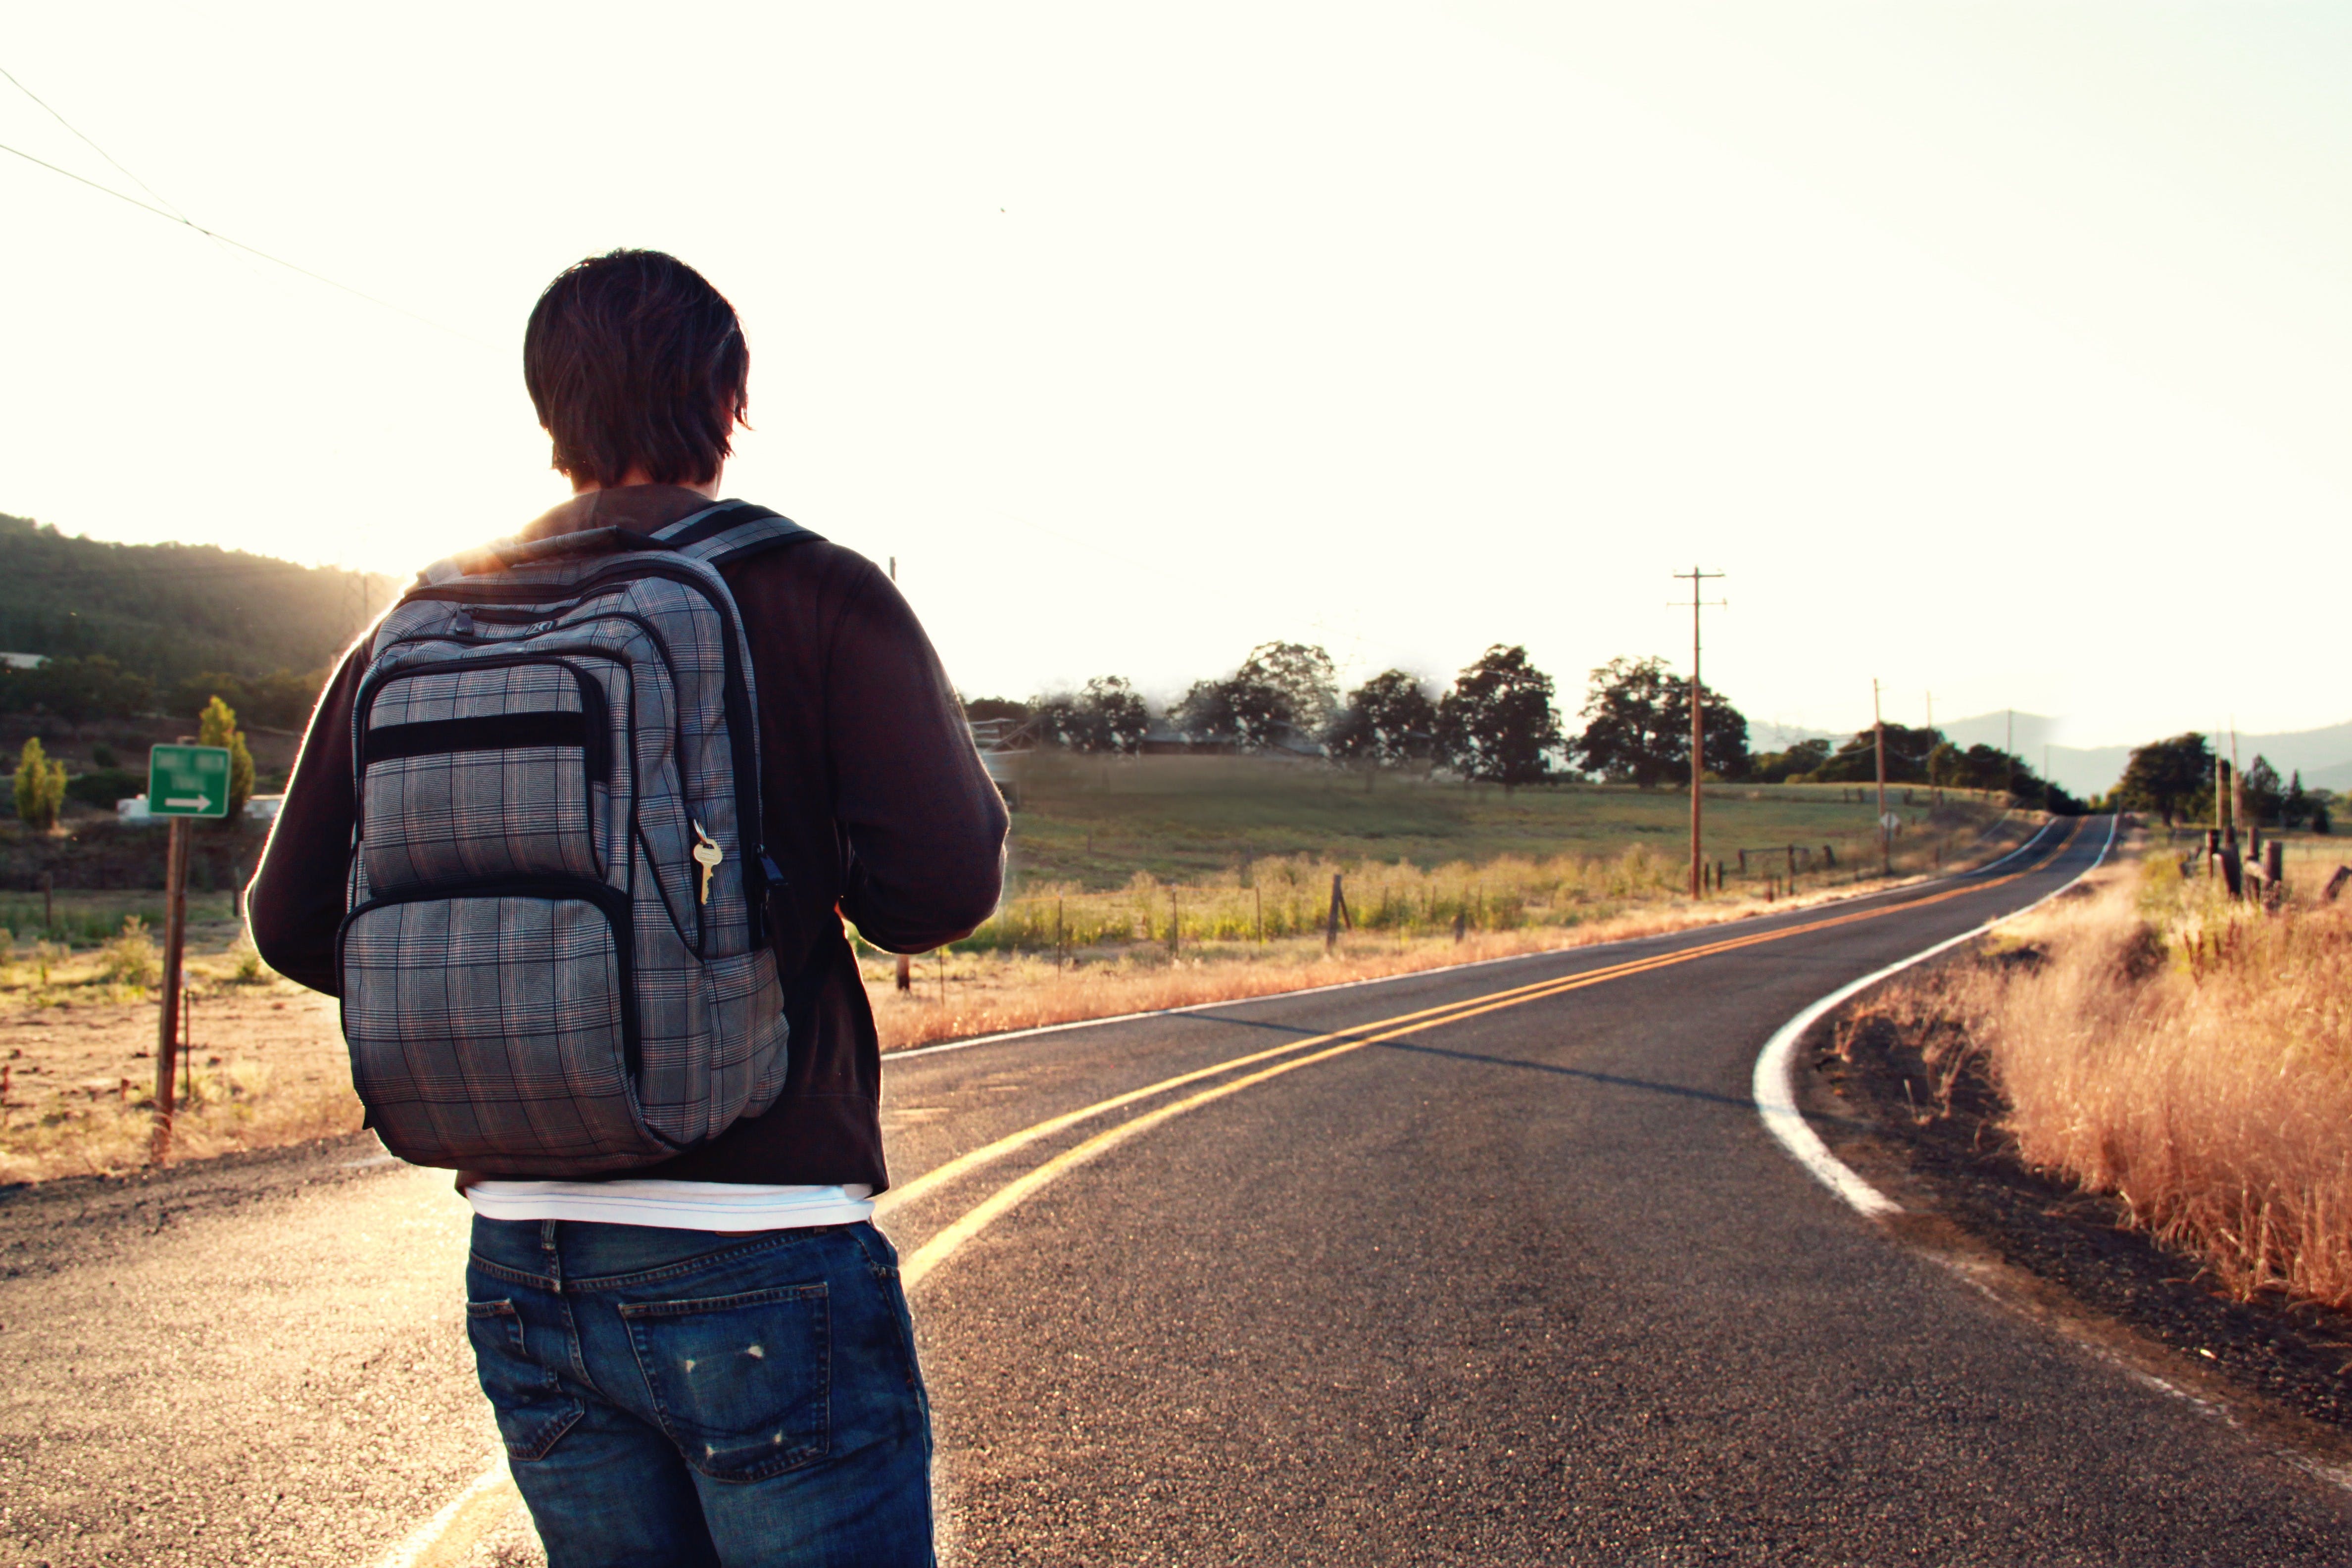 A man with a backpack walks along the road